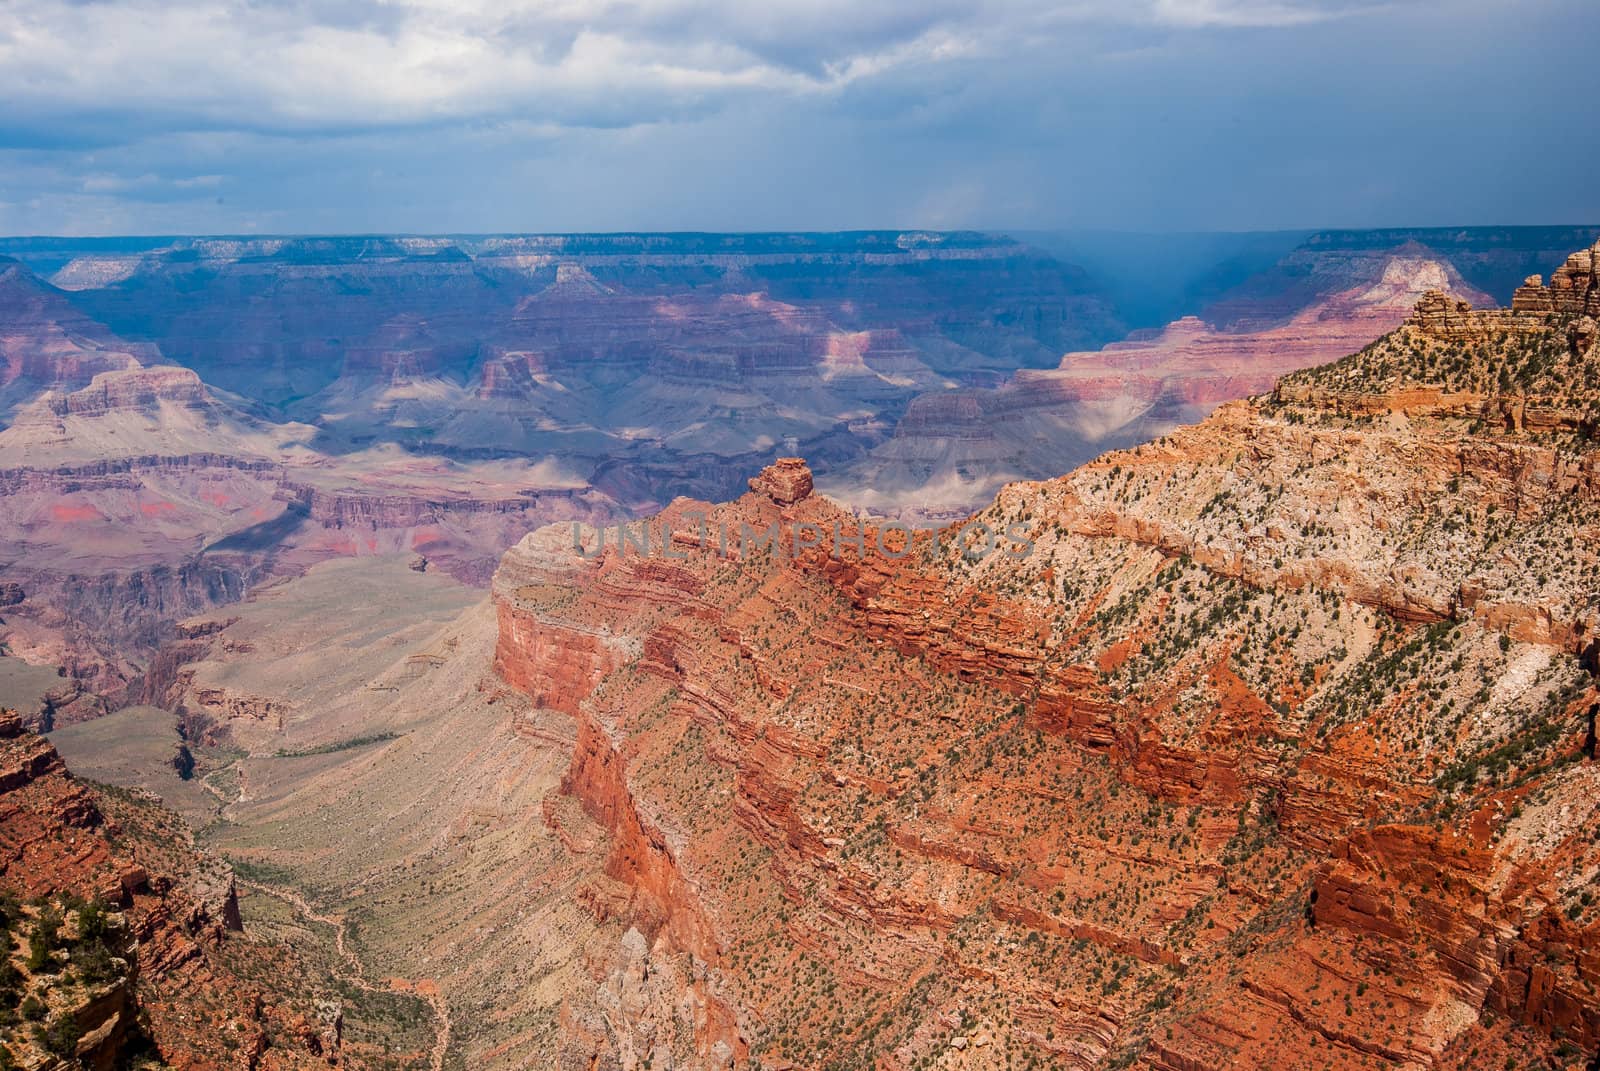 Storm over the North Rim of the Grand Canyon by oliverjw